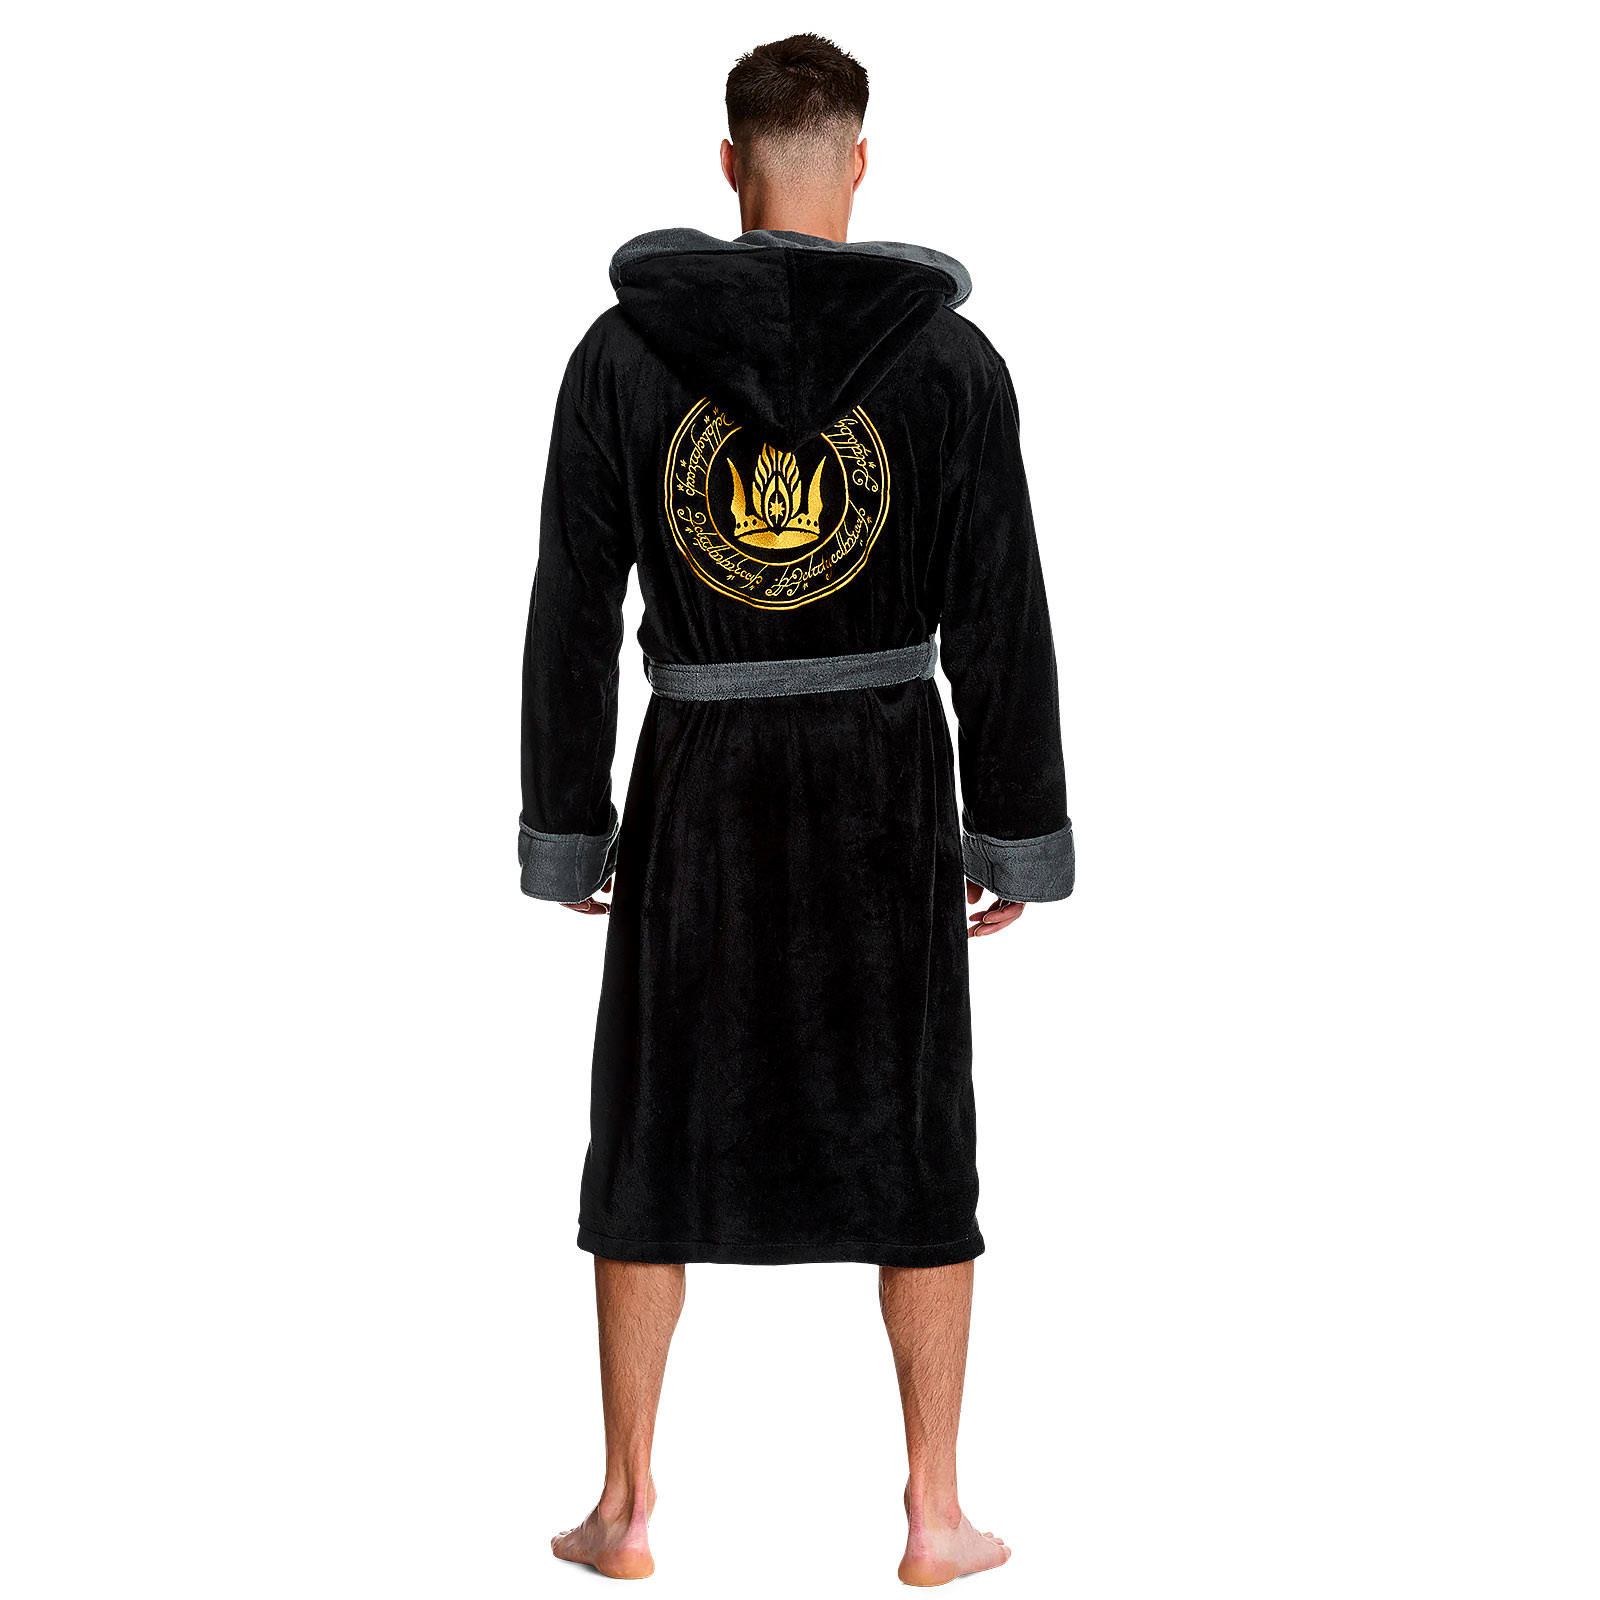 Lord of the Rings - The One Bathrobe Black